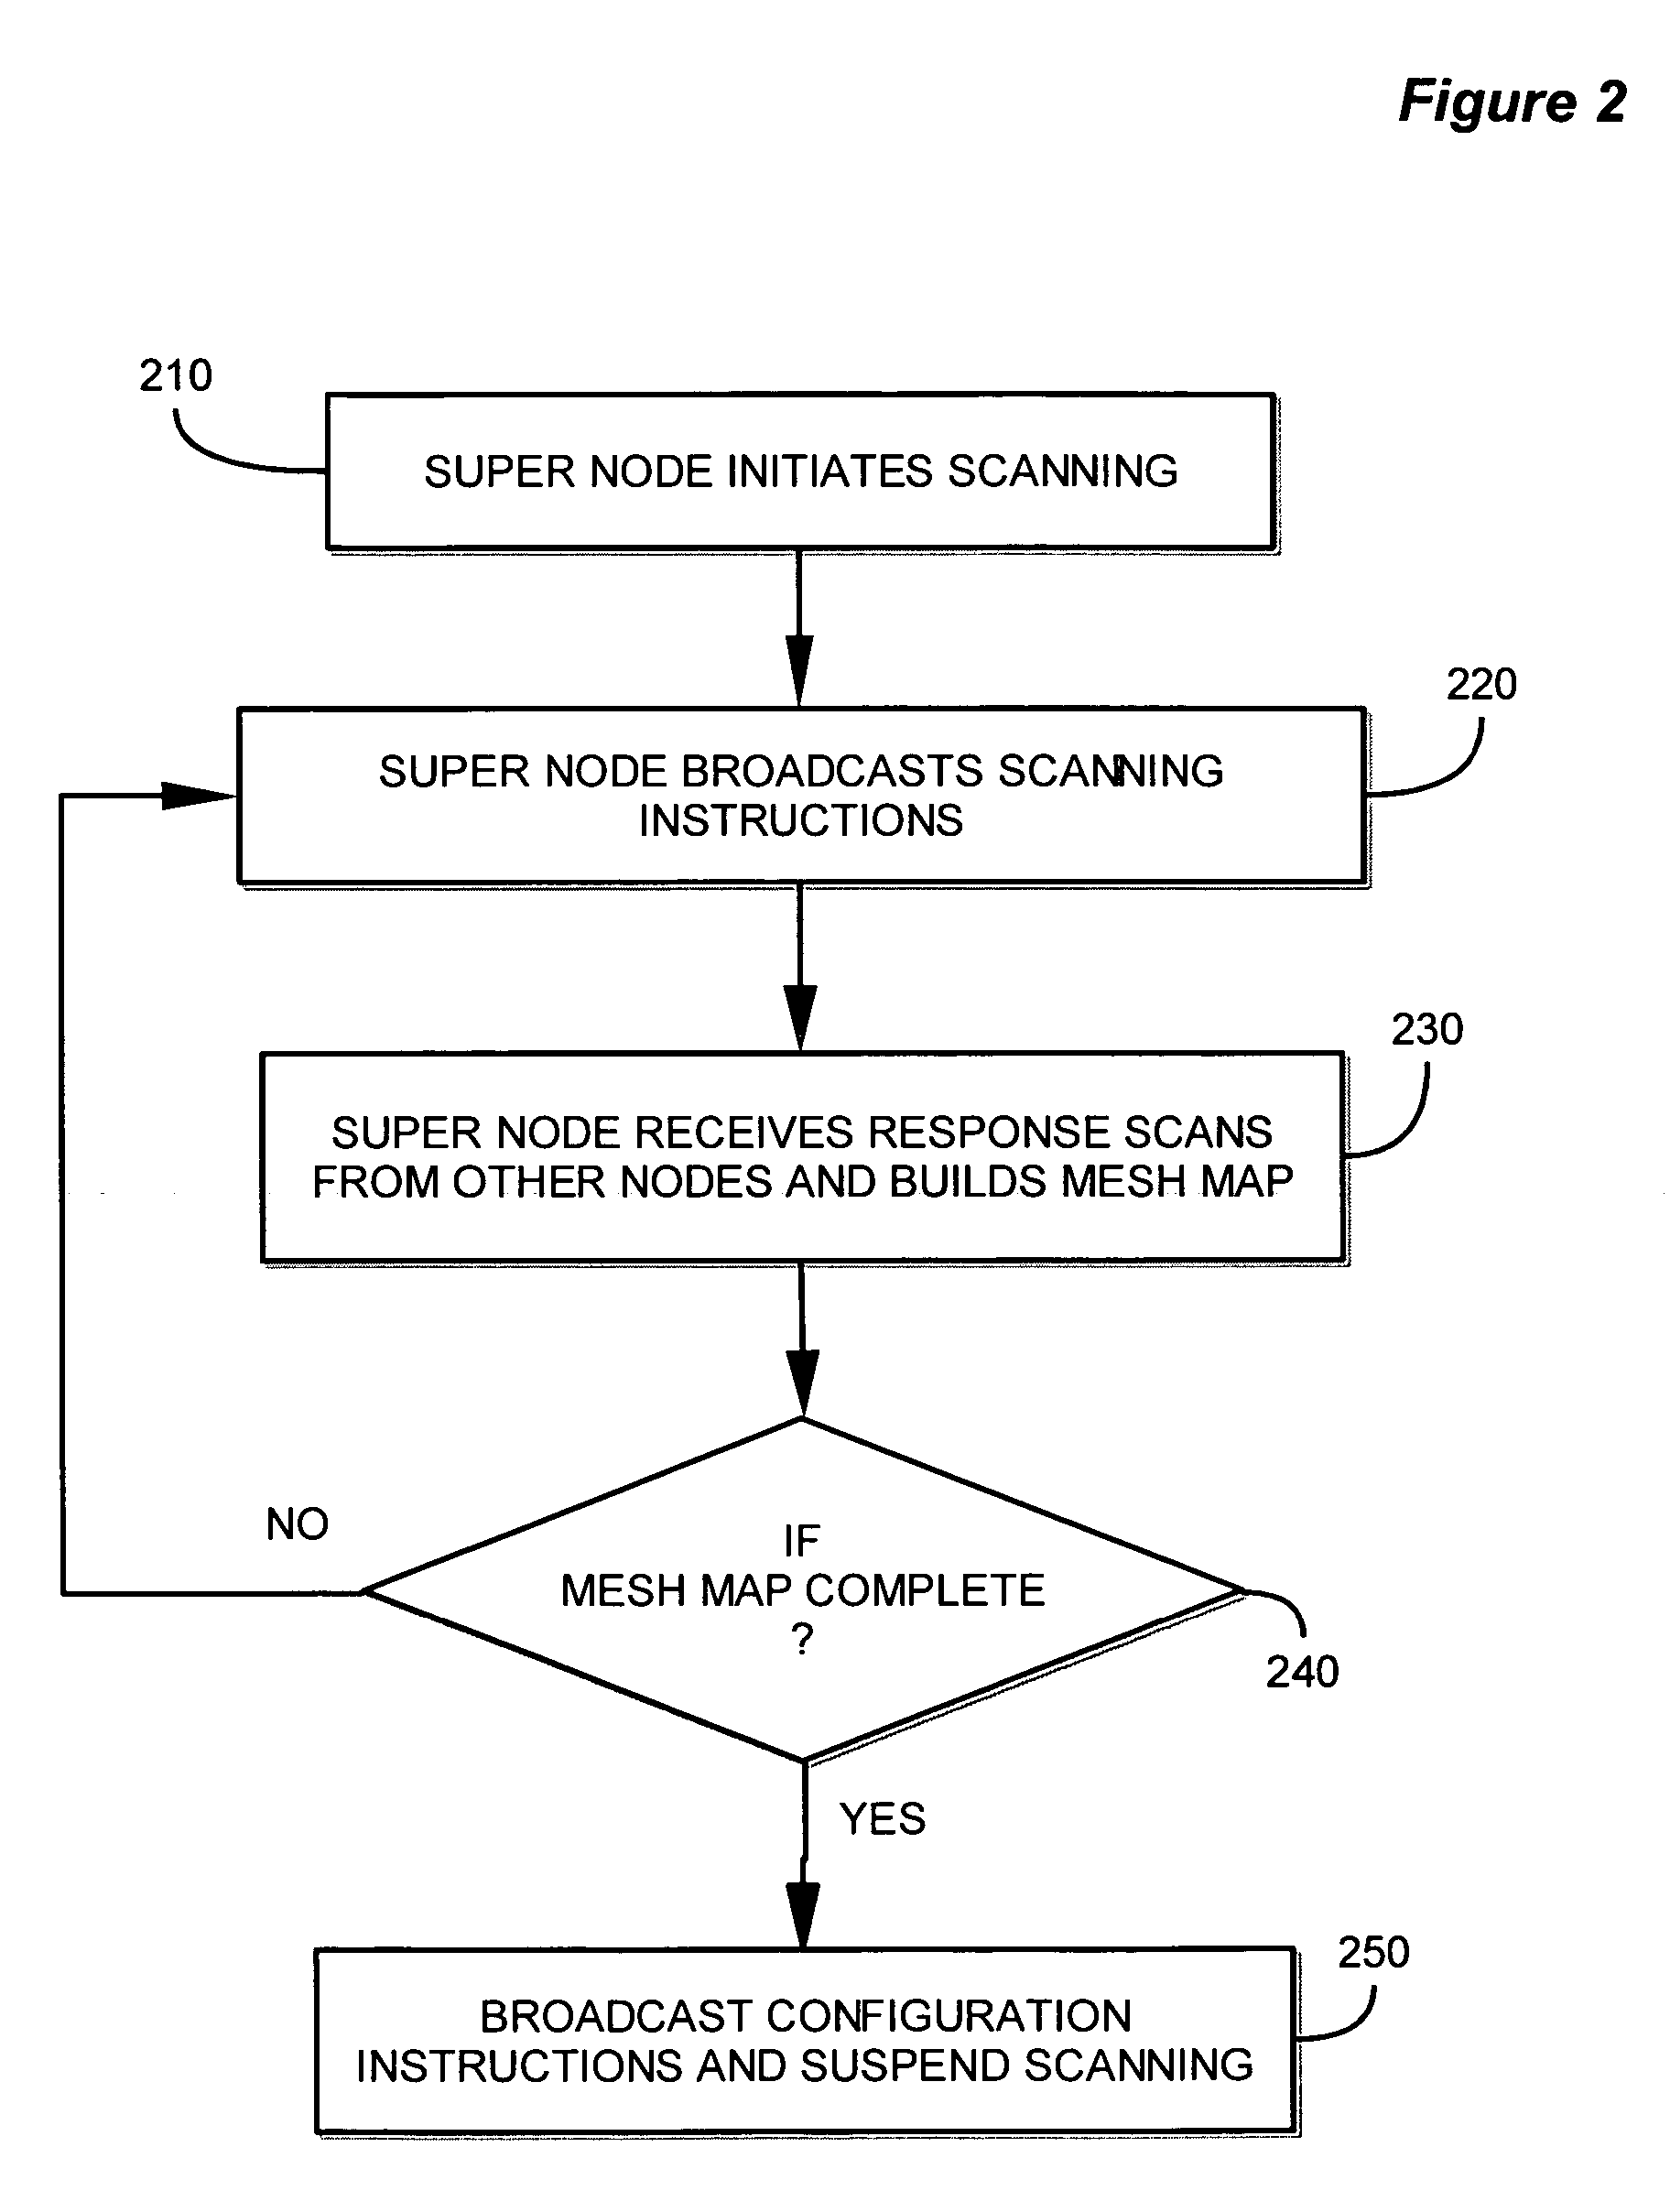 Device discovery and channel selection in a wireless networking environment